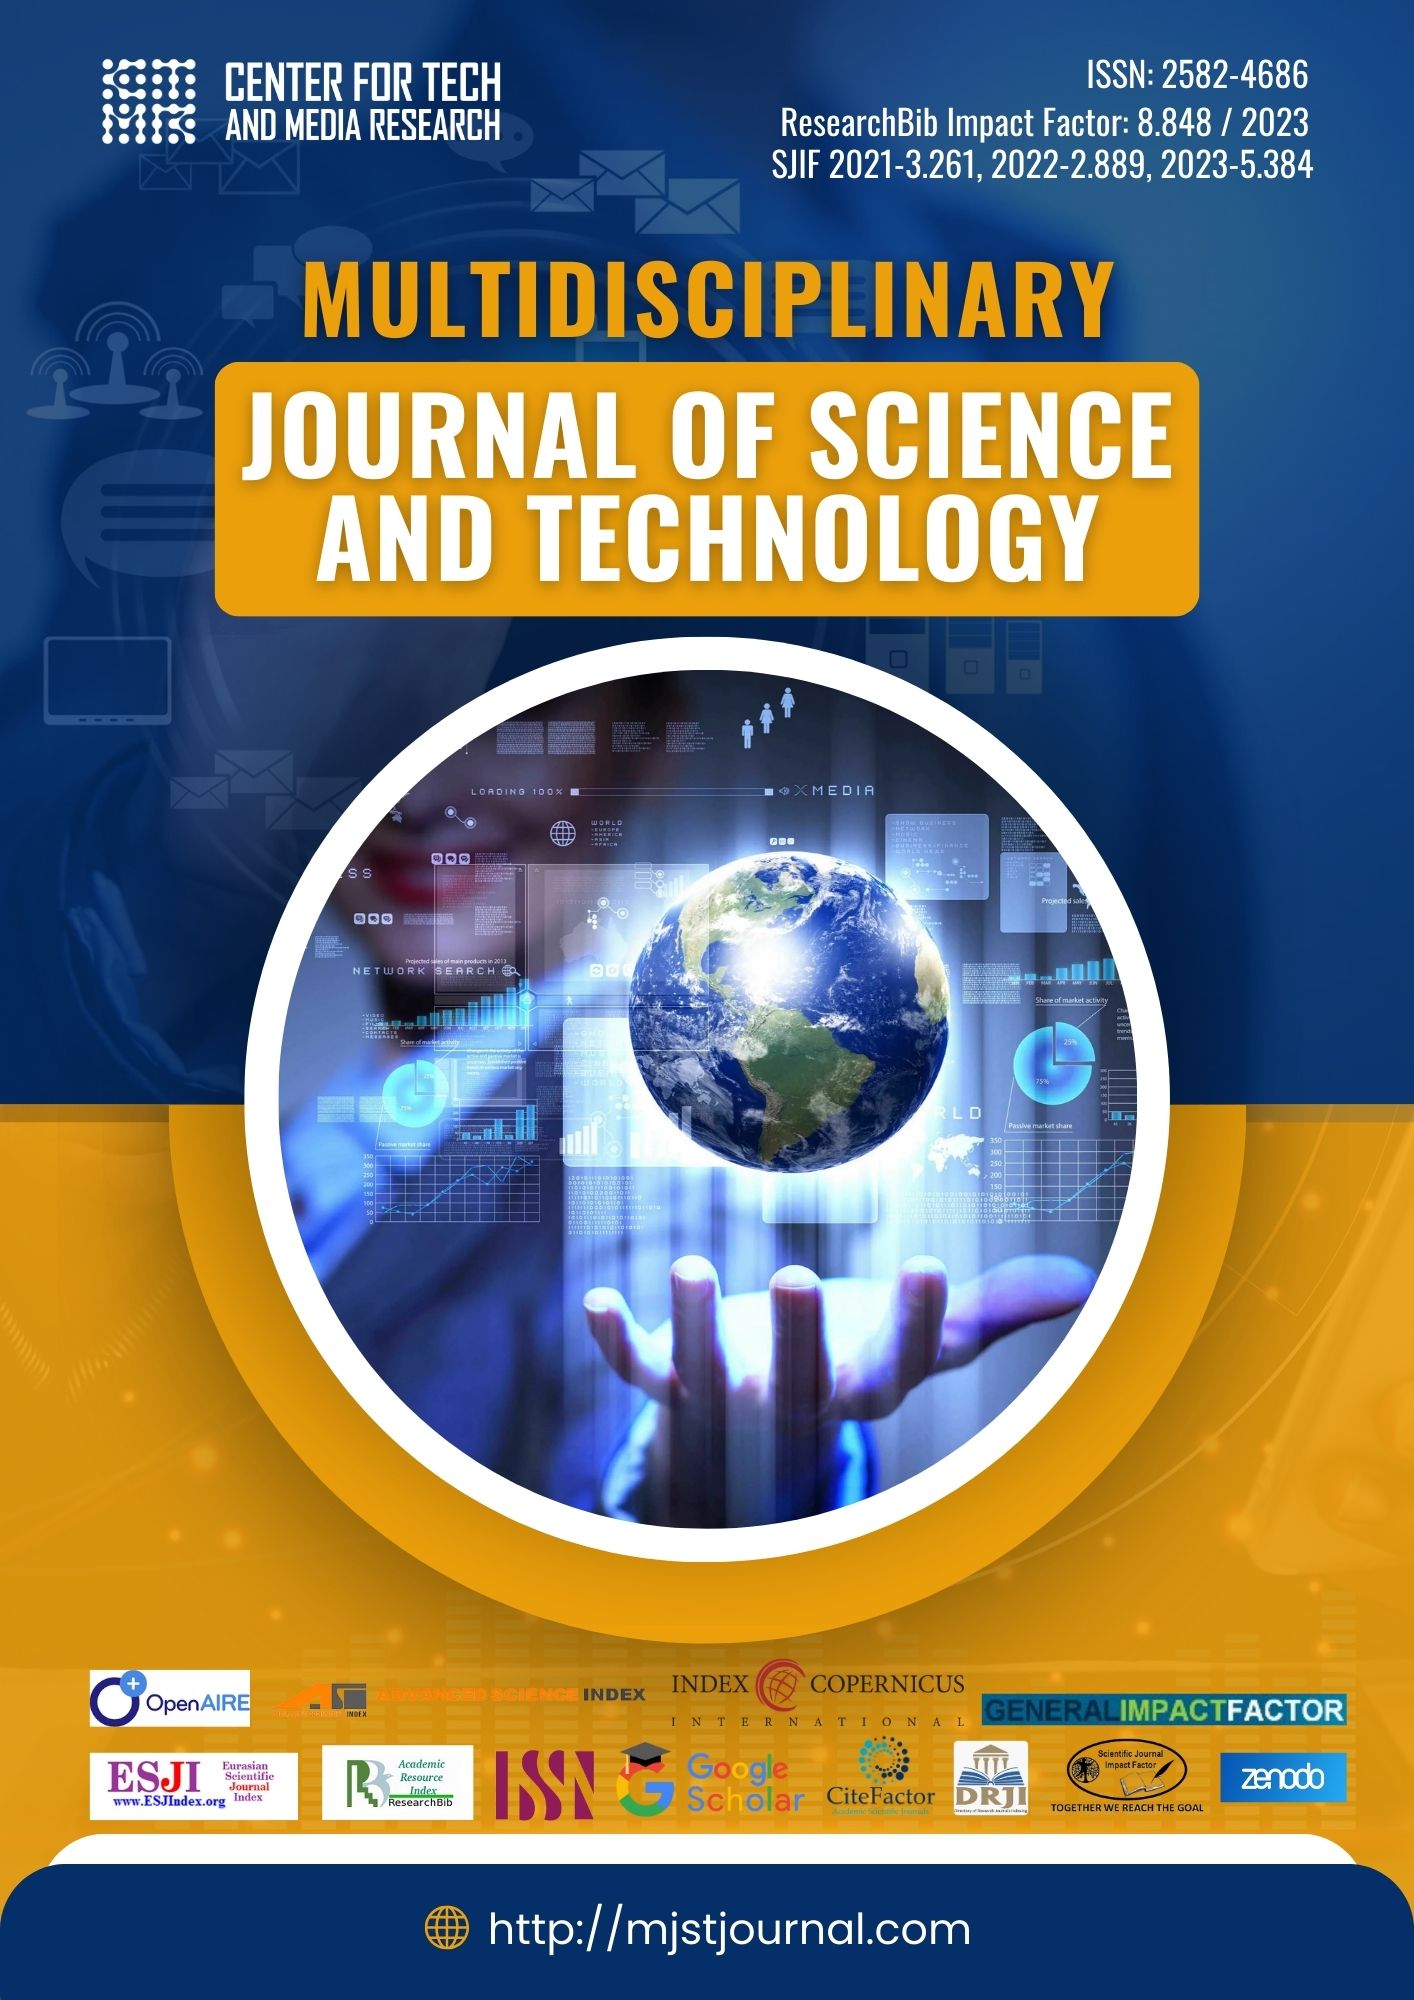                         View Vol. 4 No. 2 (2024): MULTIDISCIPLINARY JOURNAL OF SCIENCE AND TECHNOLOGY
                    